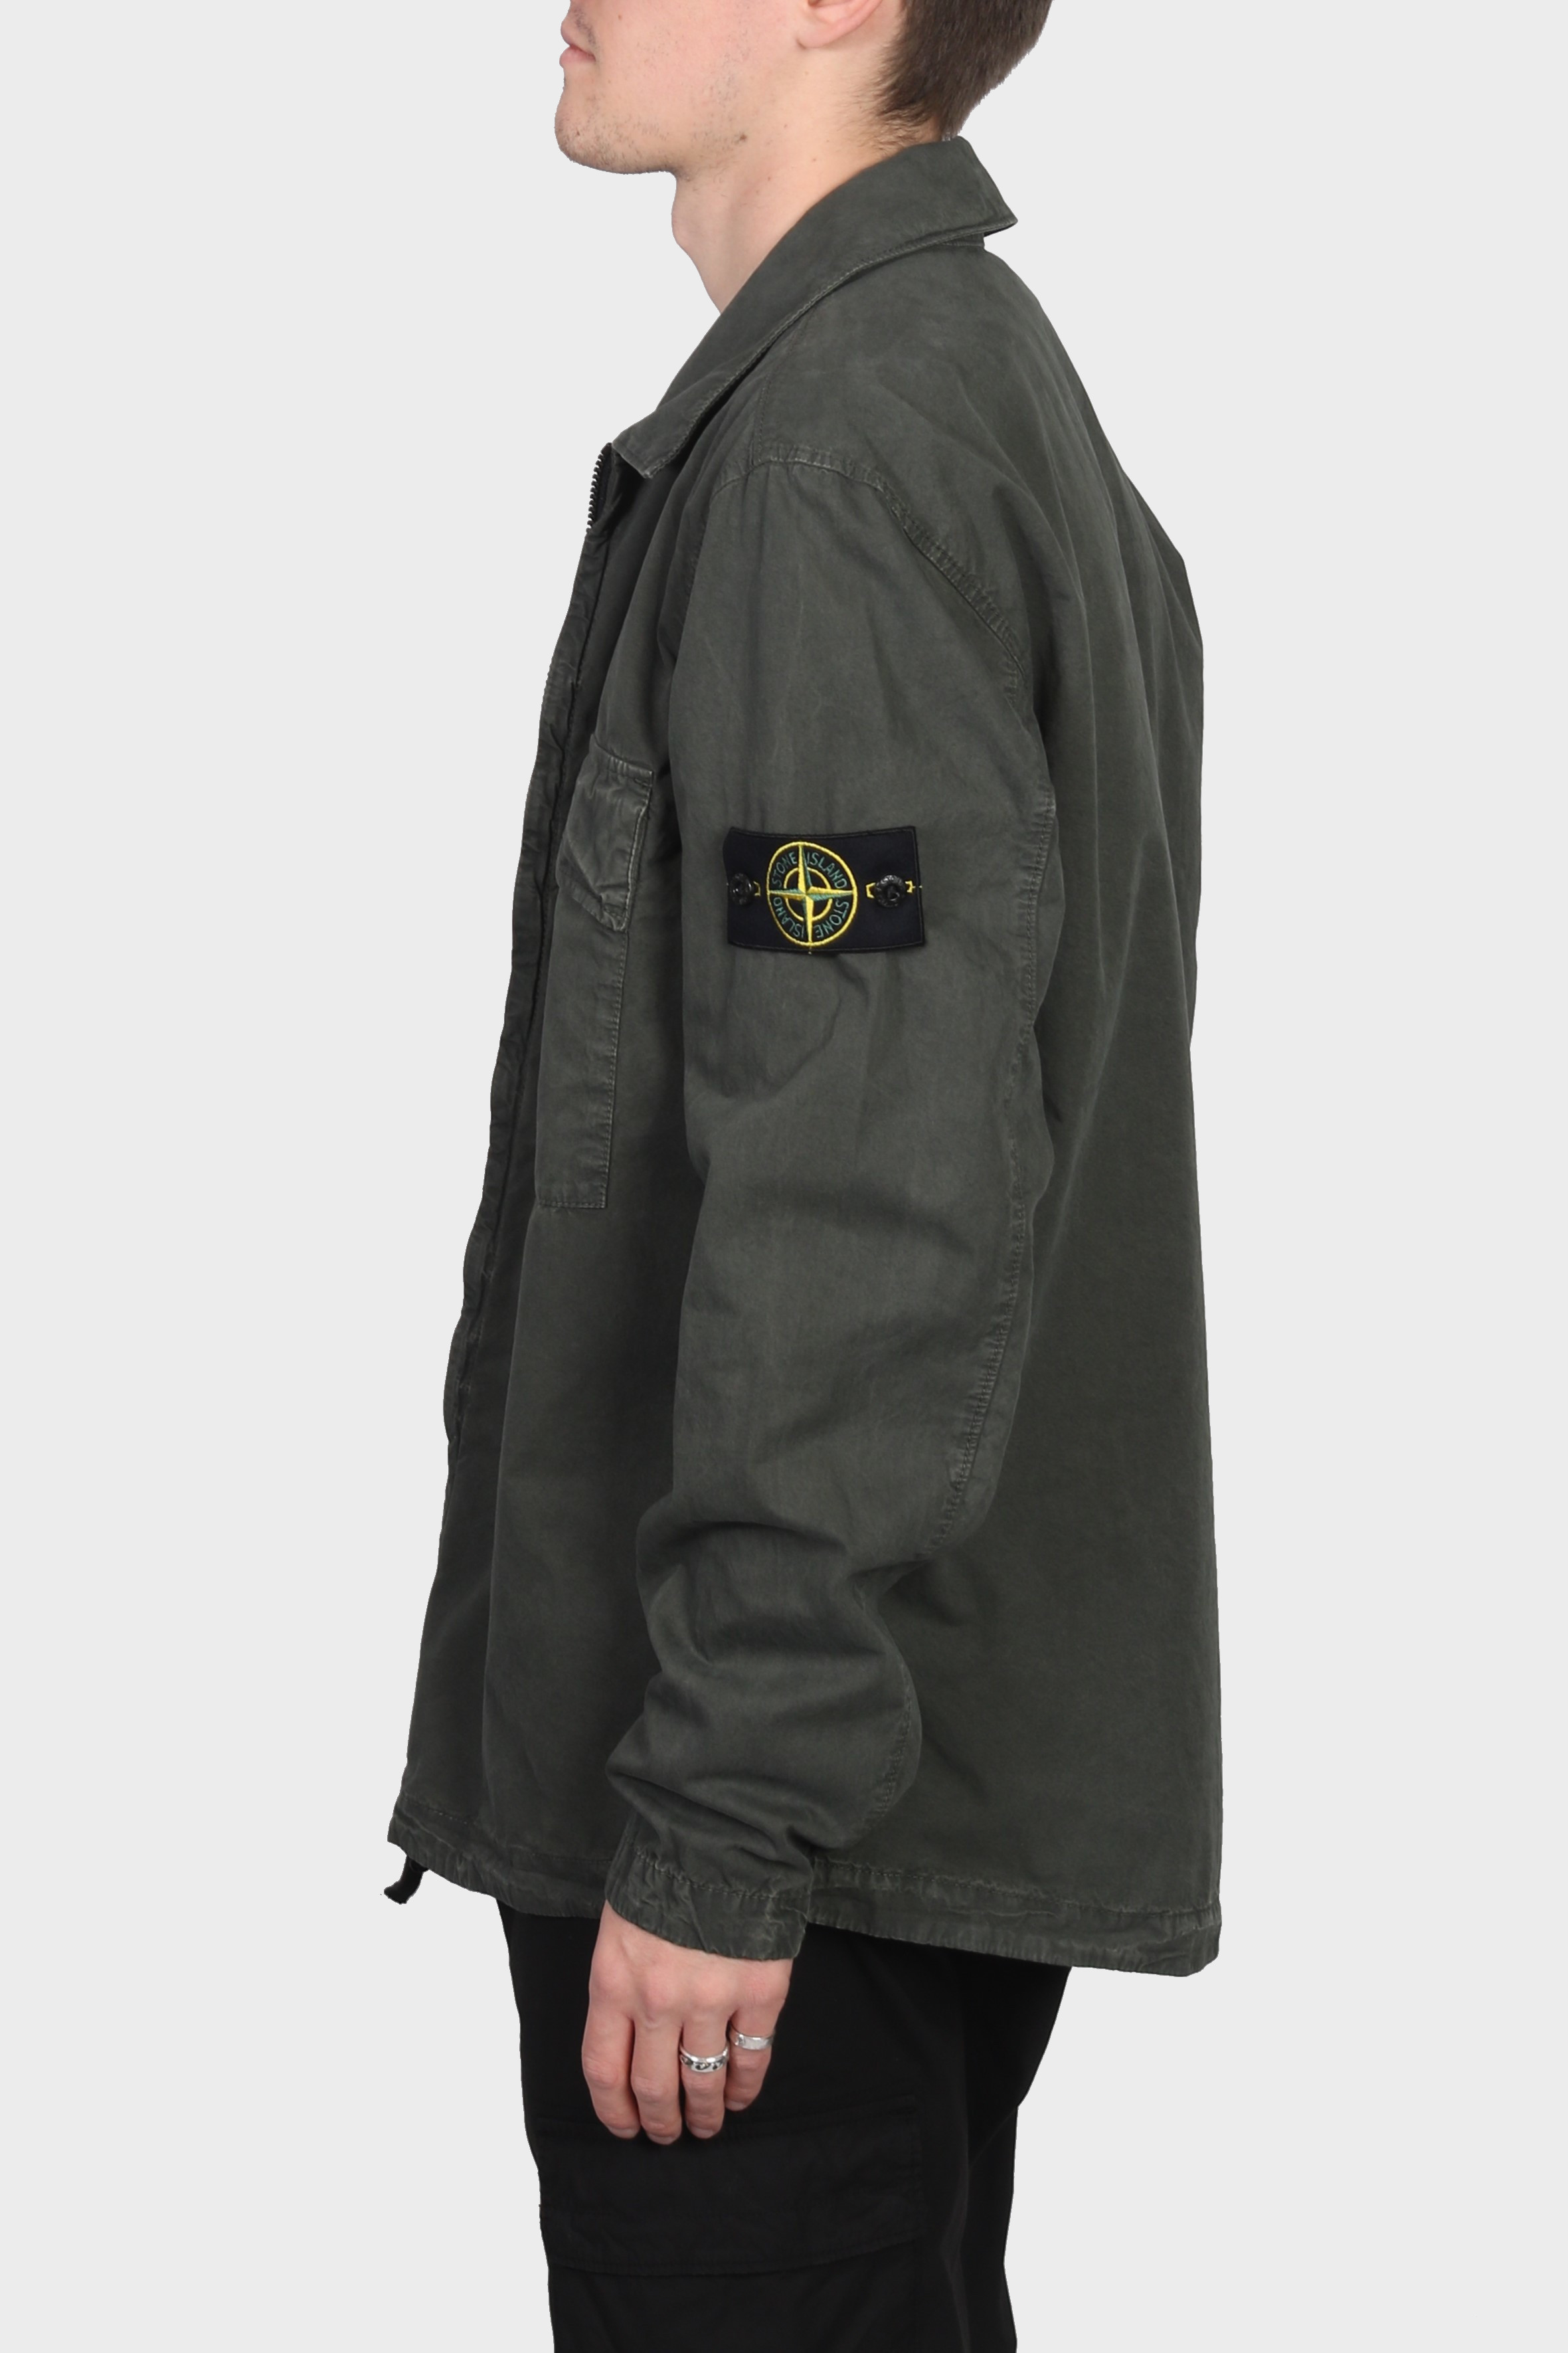 STONE ISLAND Overshirt in Washed Green M